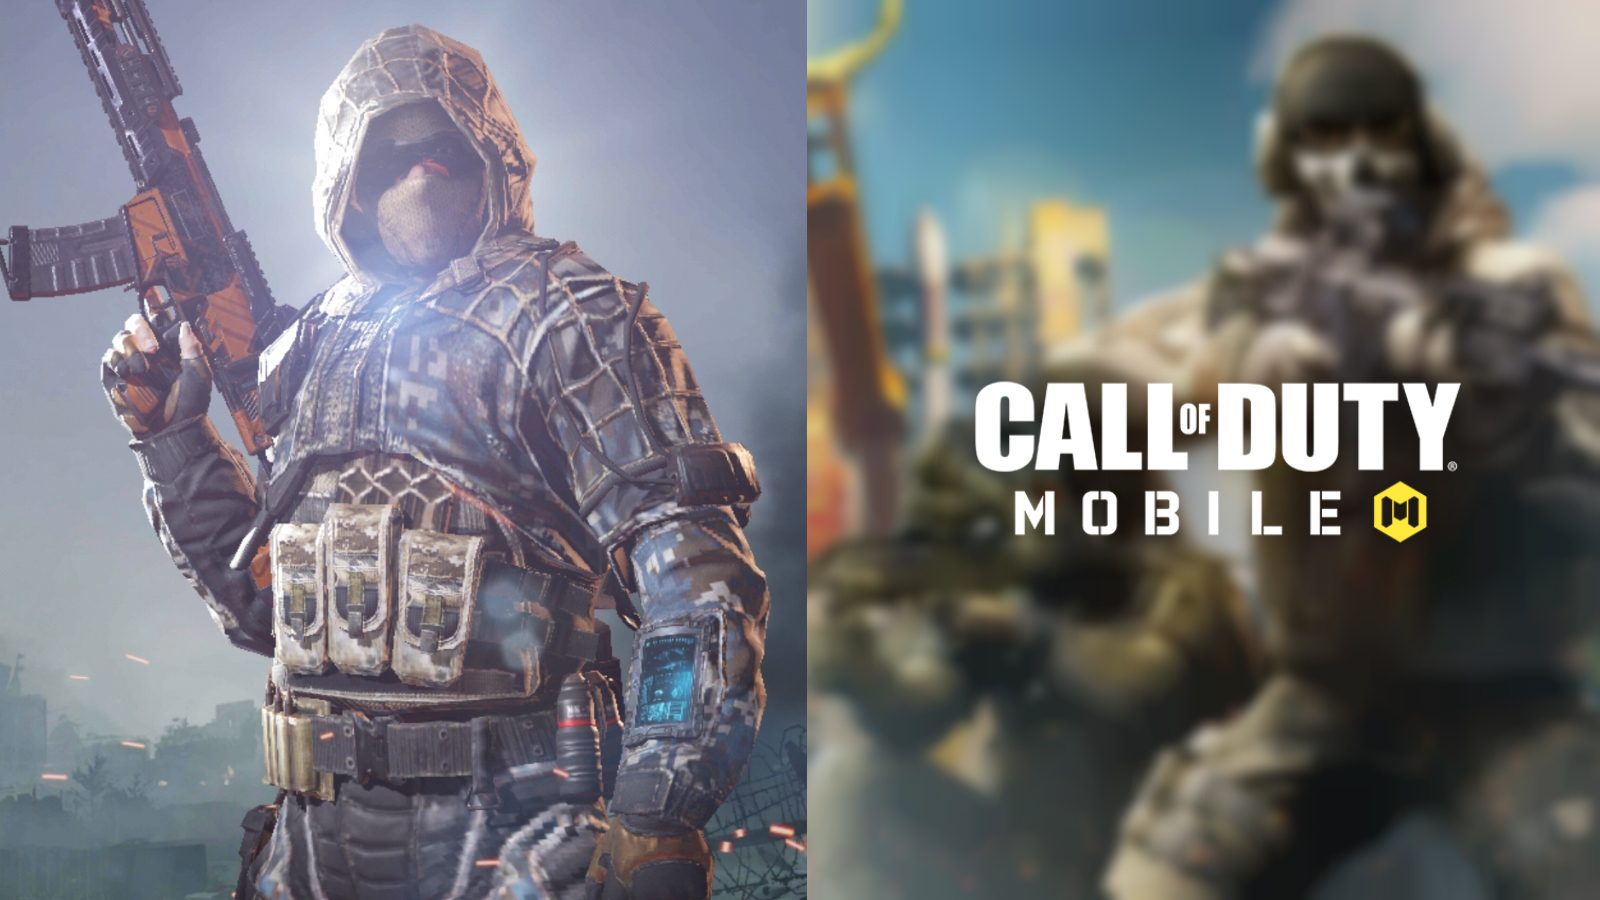 Call of Duty Mobile is already falling victim to cheats and hacks